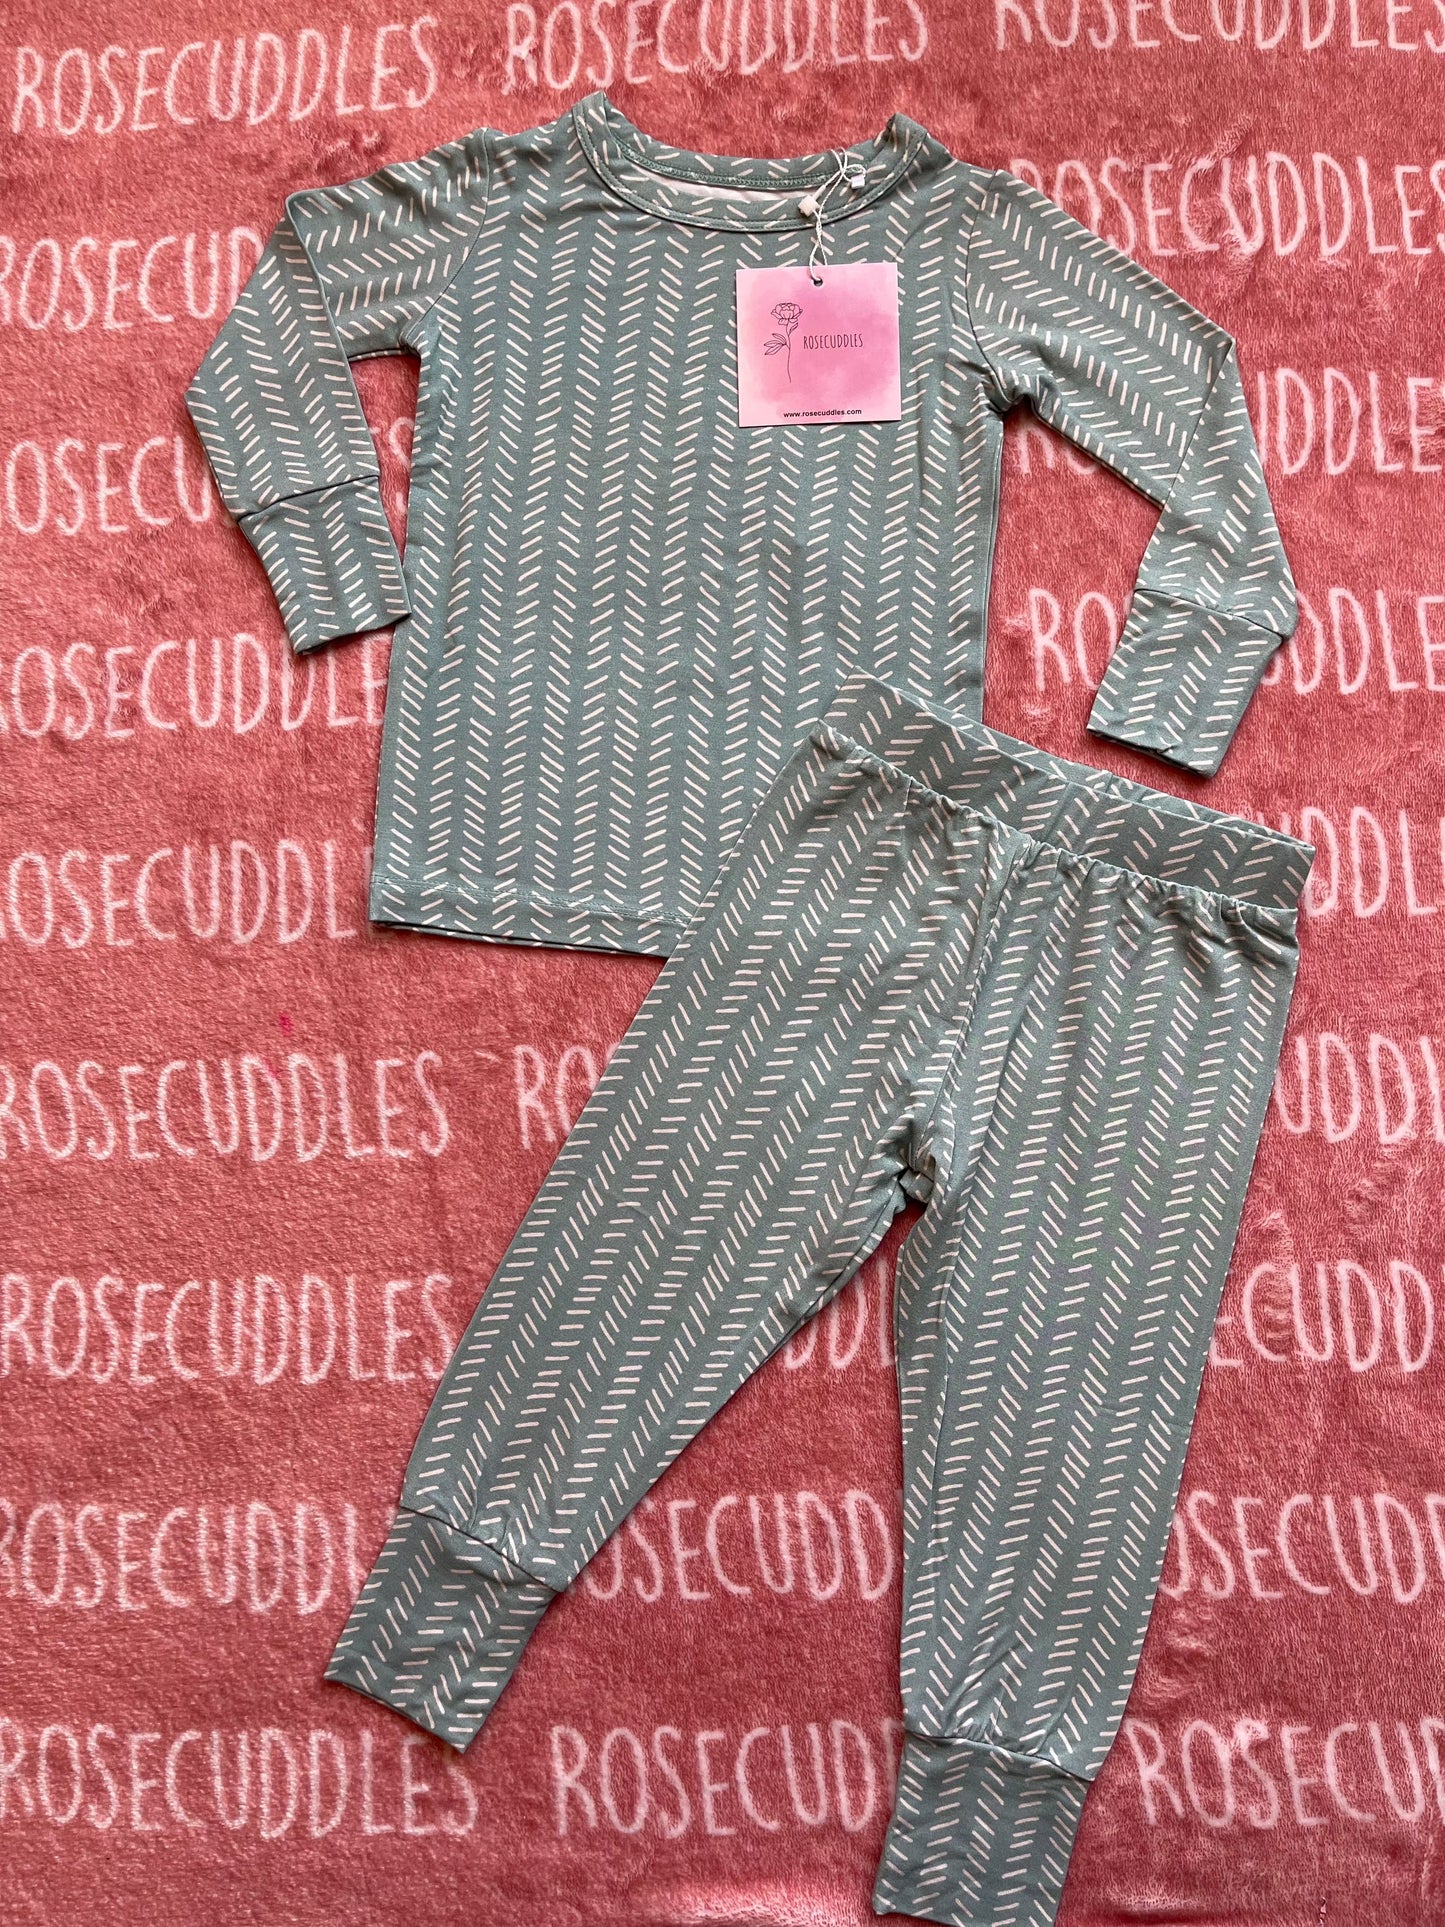 *ROSECUDDLES BAMBOO - Green Stripe - Two Piece